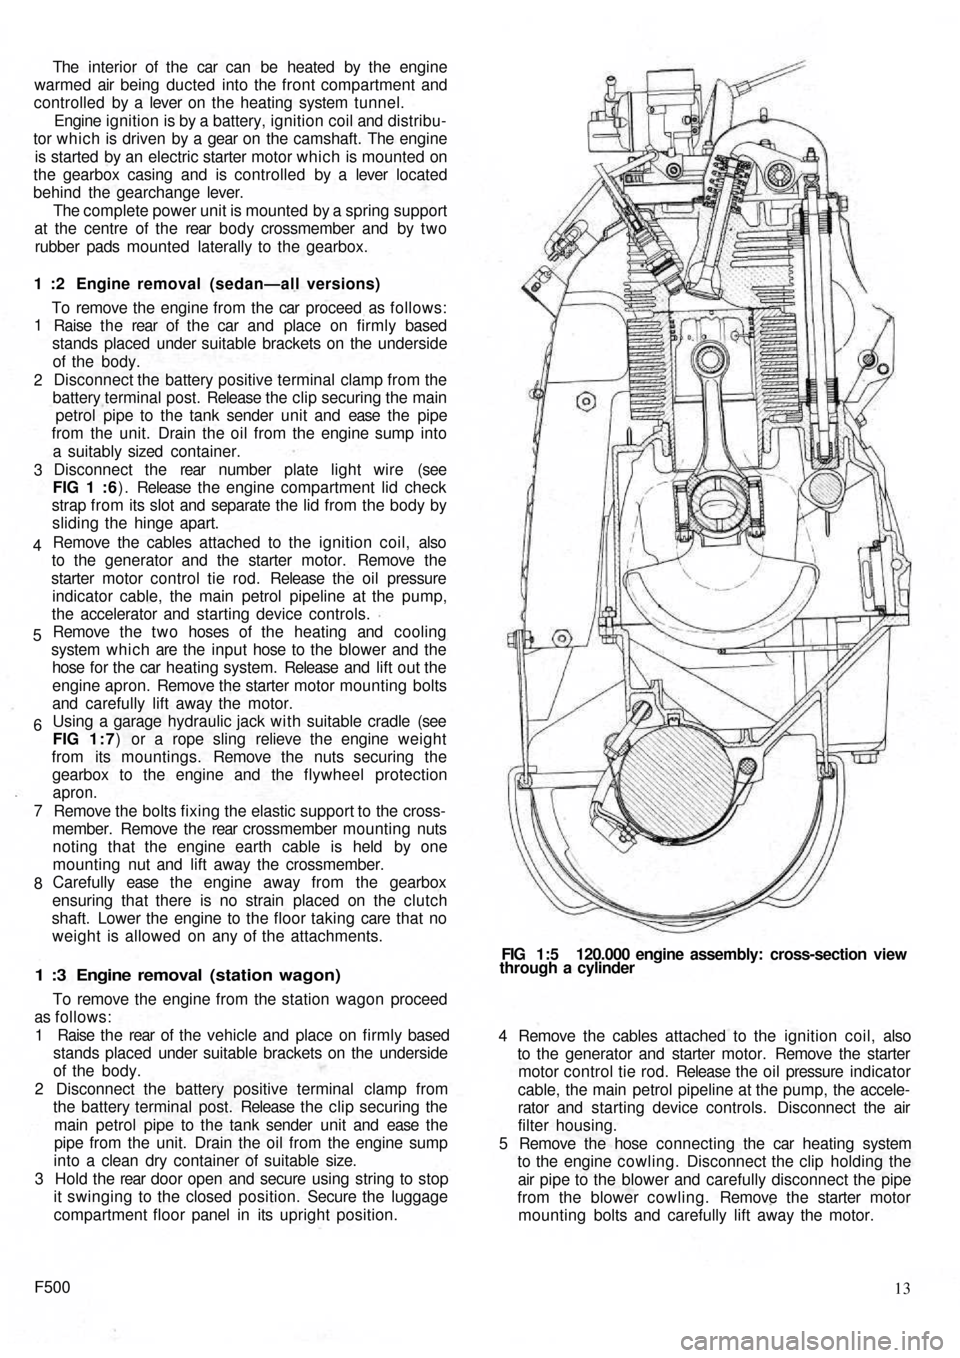 FIAT 500 1971 1.G Workshop Manual The  interior of the  car can  be heated by the engine
warmed air being ducted into the front compartment and
controlled  by a  lever on the heating system tunnel.
Engine ignition is by a battery, ign